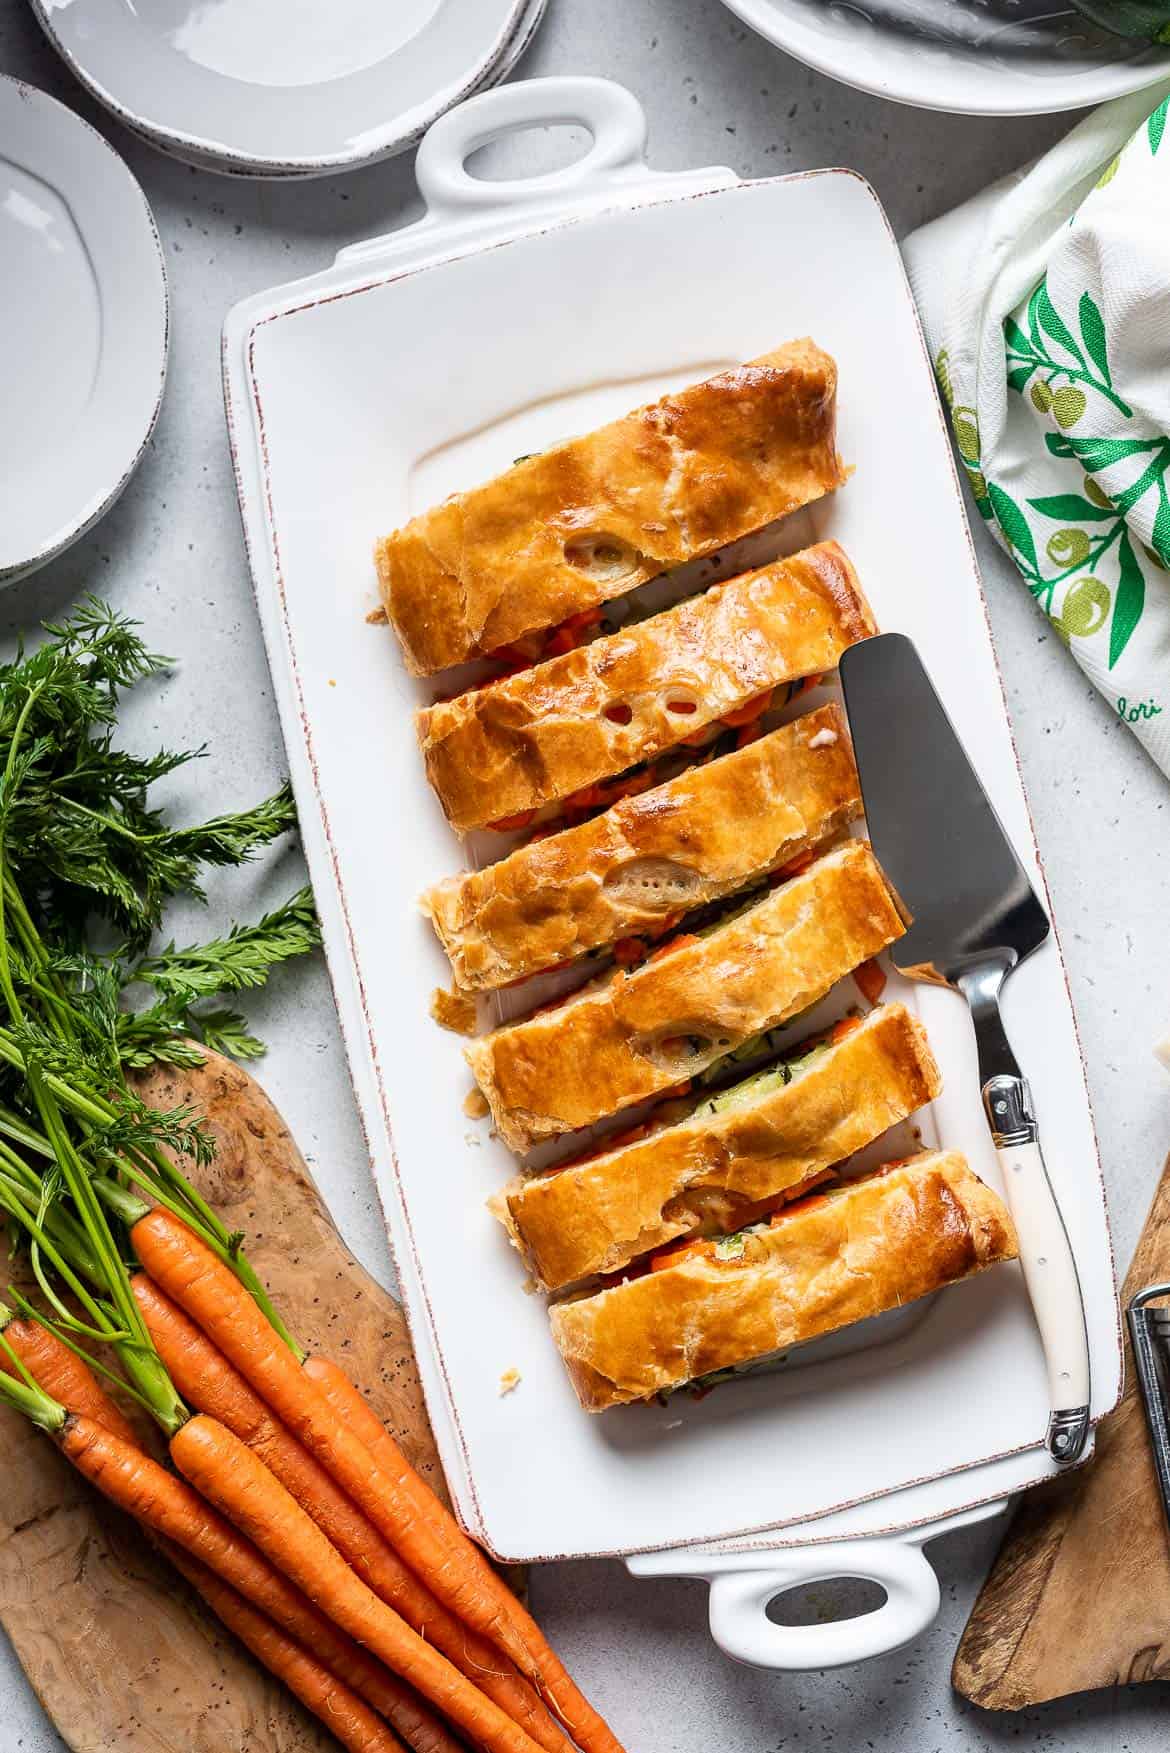 Carrot and Zucchini Strudel sliced on a serving tray.